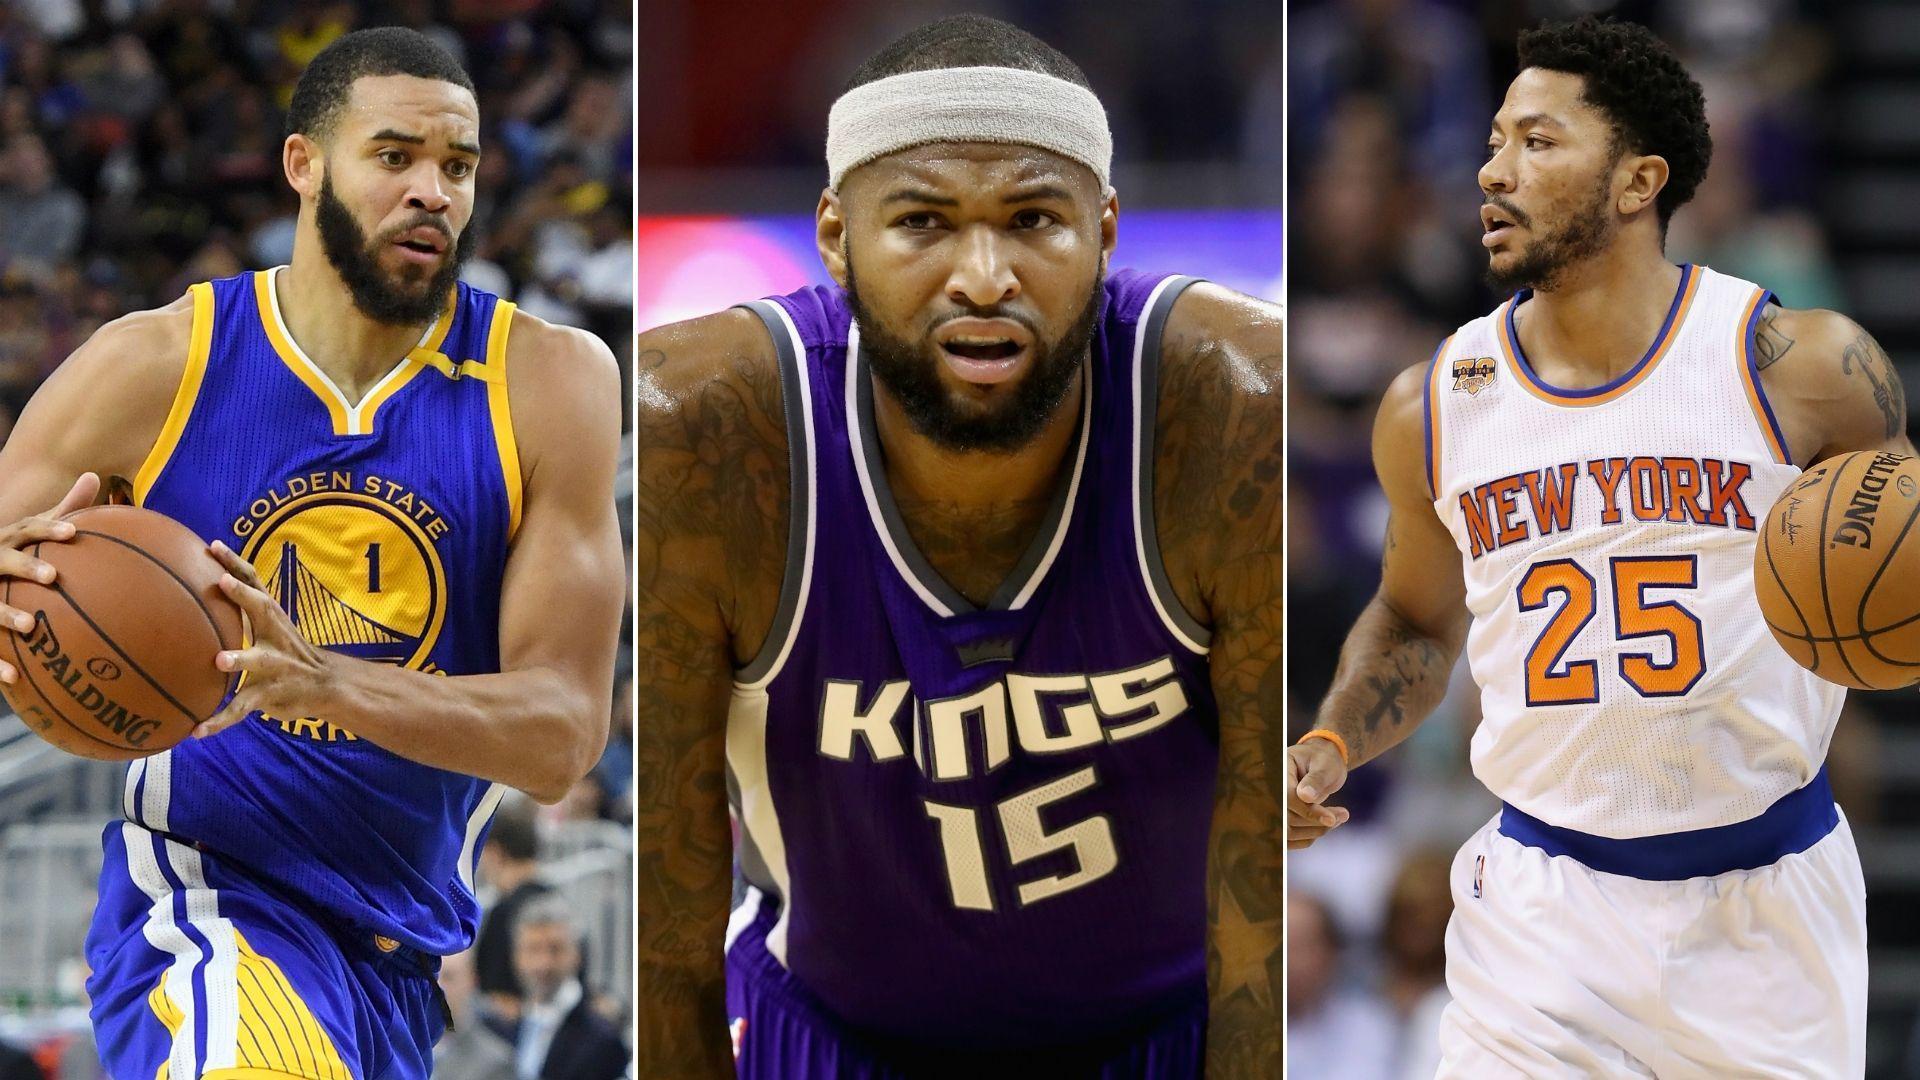 Bold NBA predictions for 2017: Two GMs fired and new deals